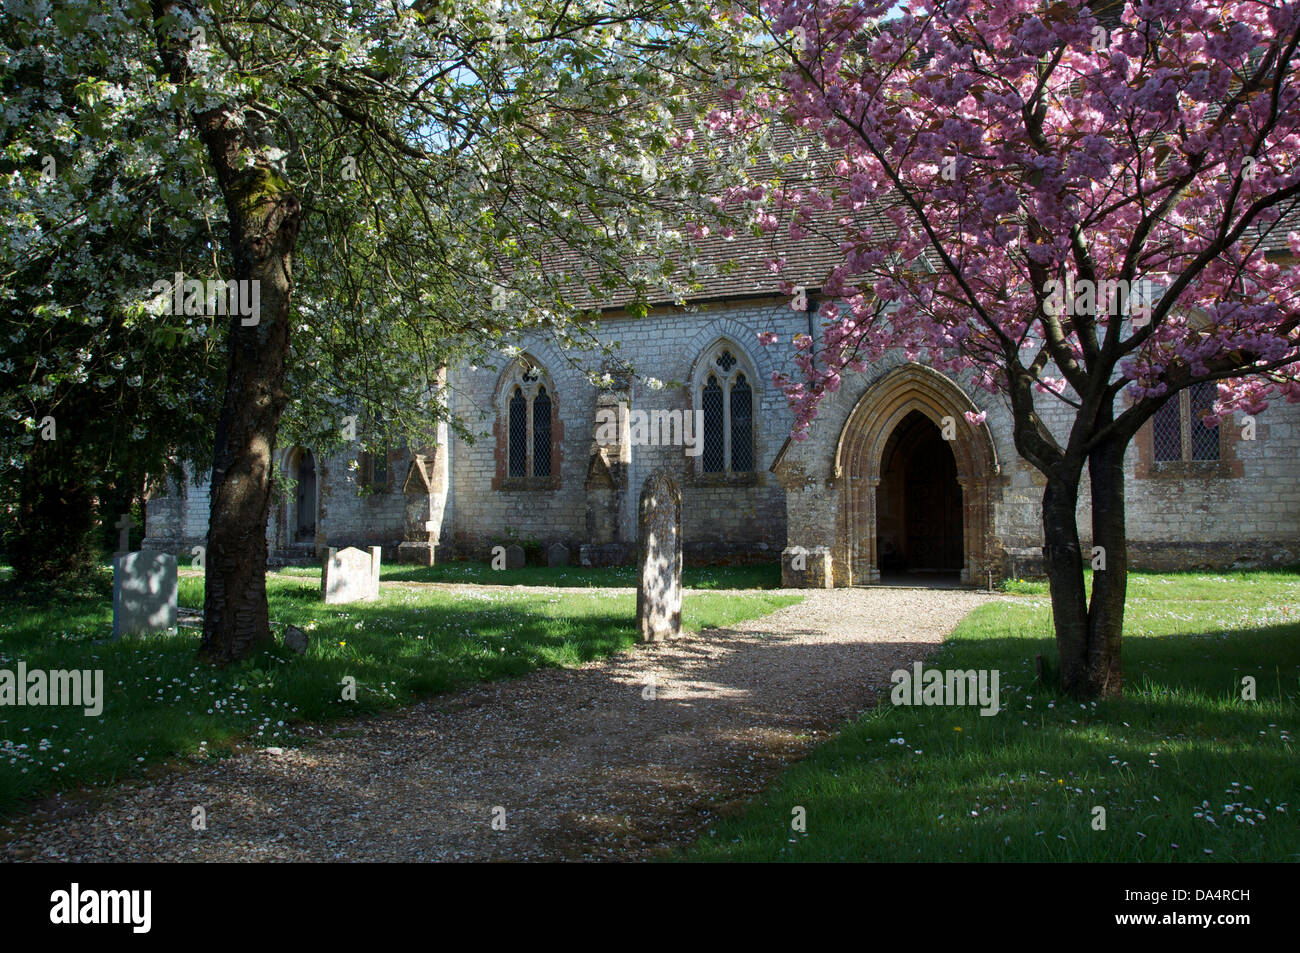 Springtime. The church of Saint John the Evangelist, in the Dorset village of Tincleton. The trees in the churchyard are in blossom. England, UK. Stock Photo